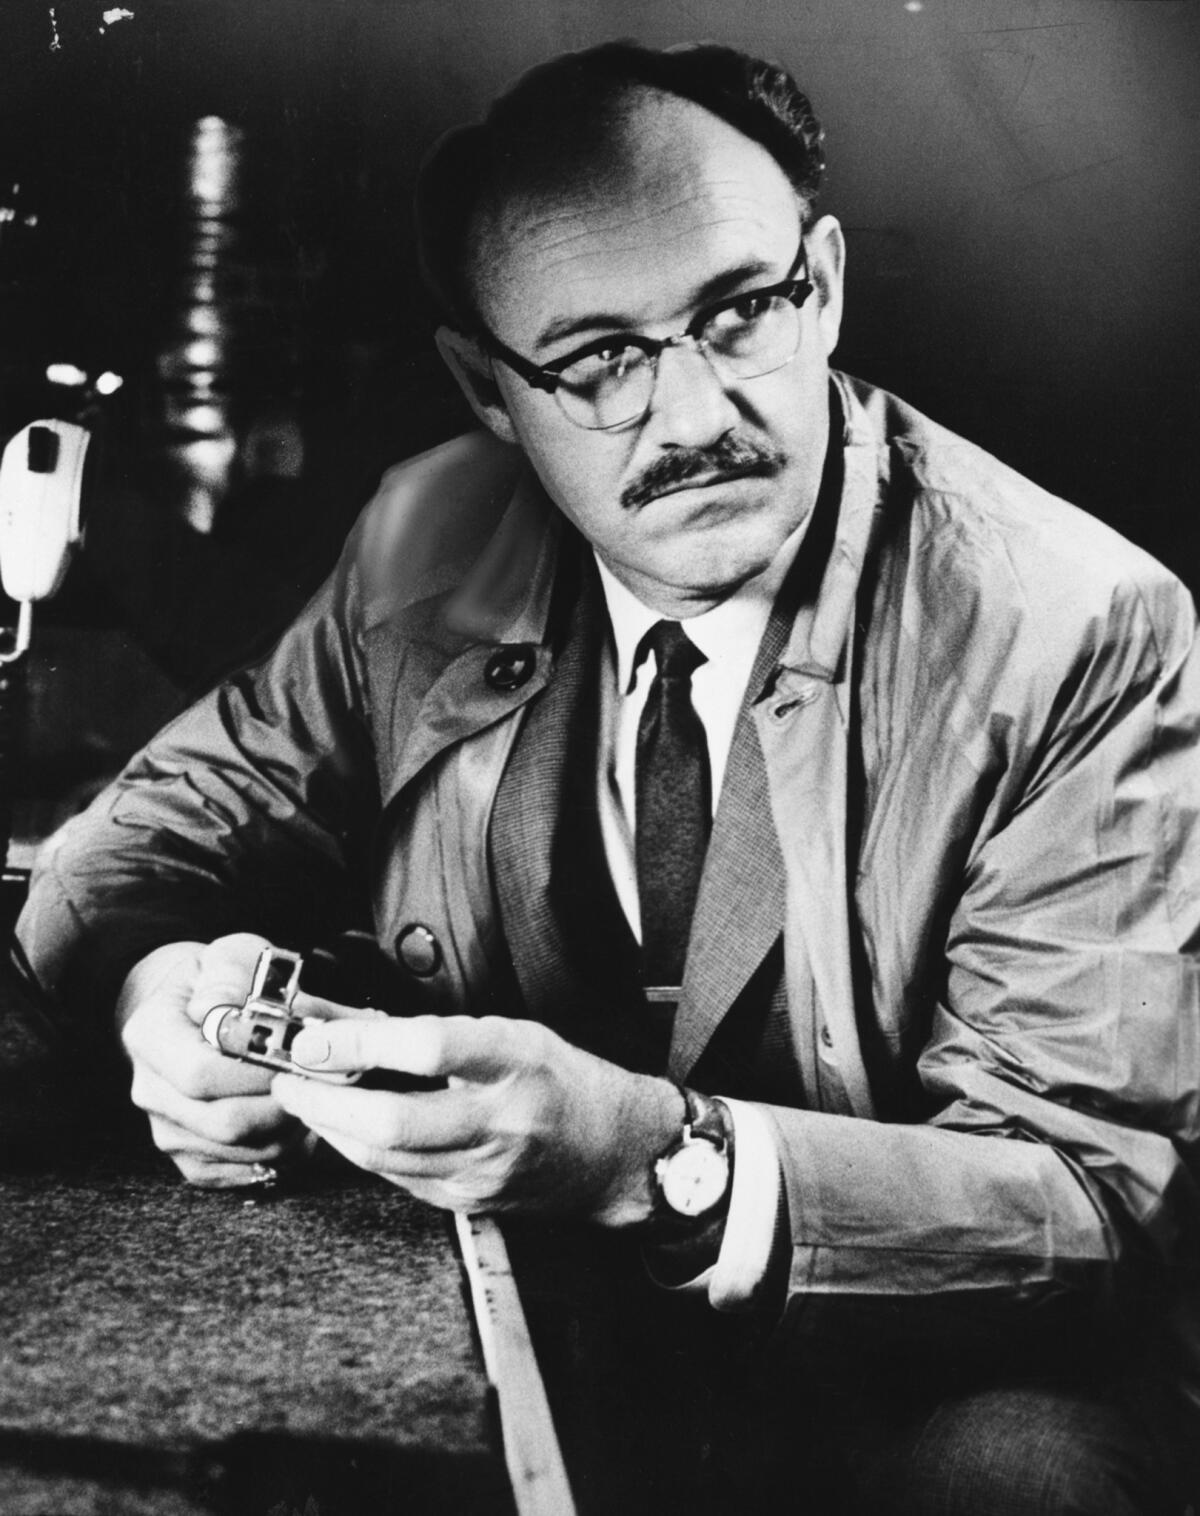 Sure, part of the charm of this film is seeing Gene Hackman wear John Cleese's raincoat from the "Dead Parrot" sketch for an hour, but these NSA-dominated times are well suited for revisiting a true classic of surveillance and paranoia. Hackman portrays an uptight and tormented professional eavesdropper, and while the film may venture over the top in depicting a growing obsession over a recorded conversation, it's also memorably haunting.